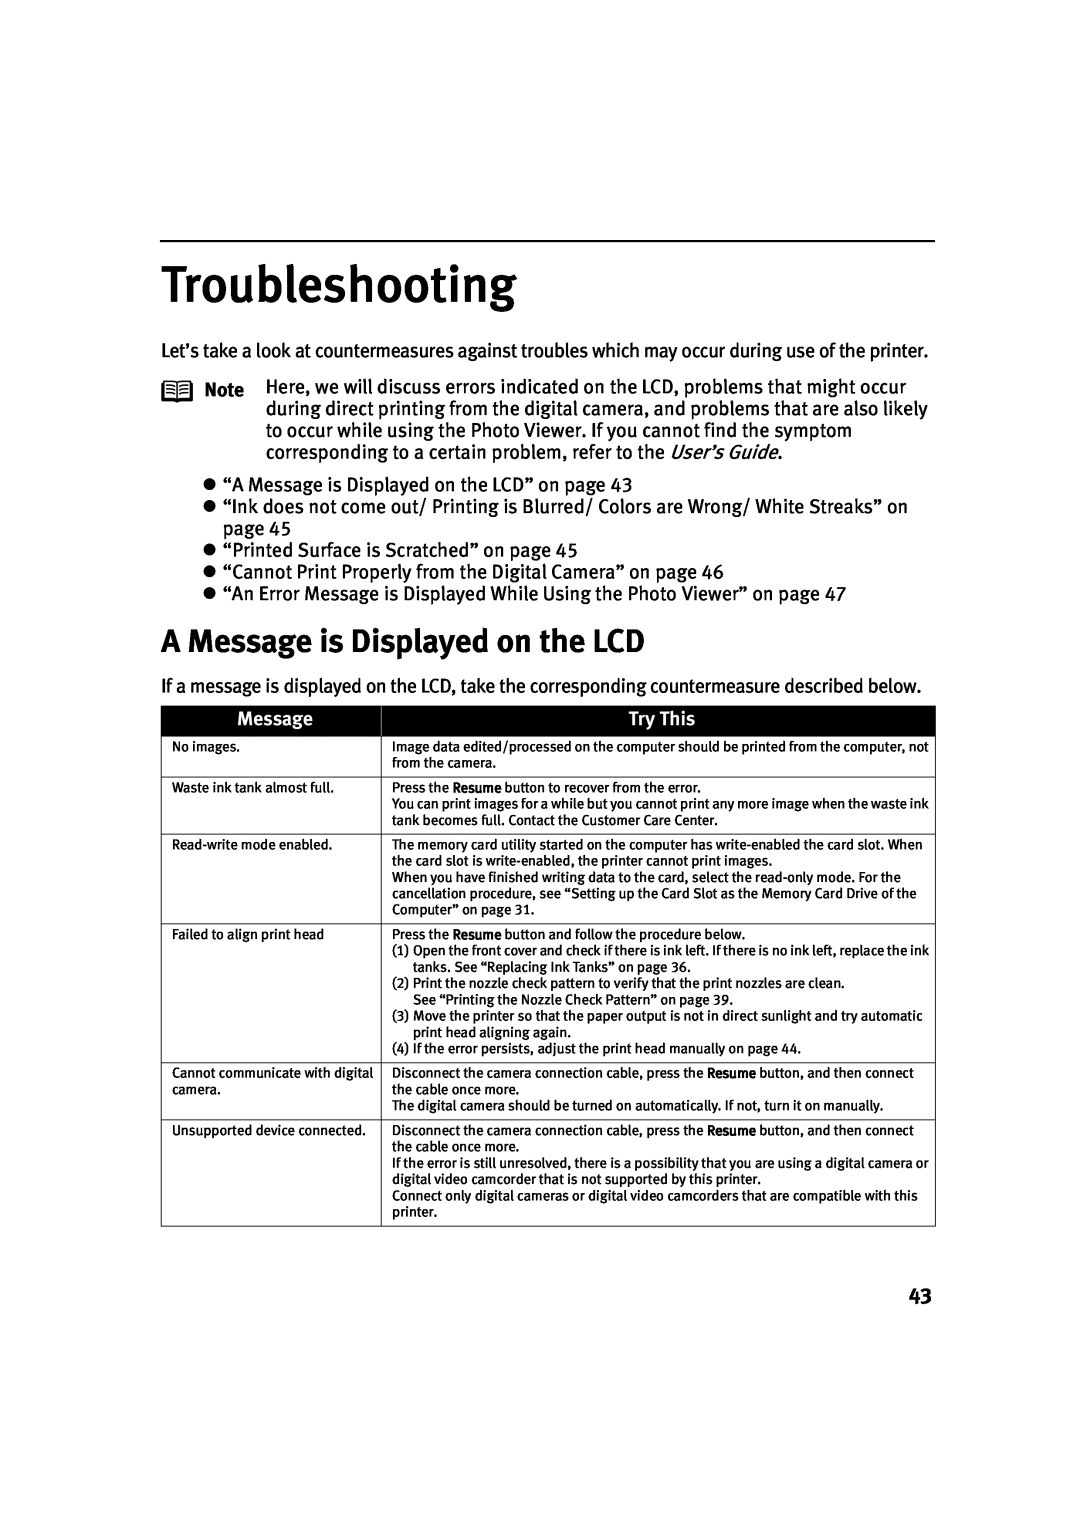 Canon 900D manual Troubleshooting, A Message is Displayed on the LCD, Try This 